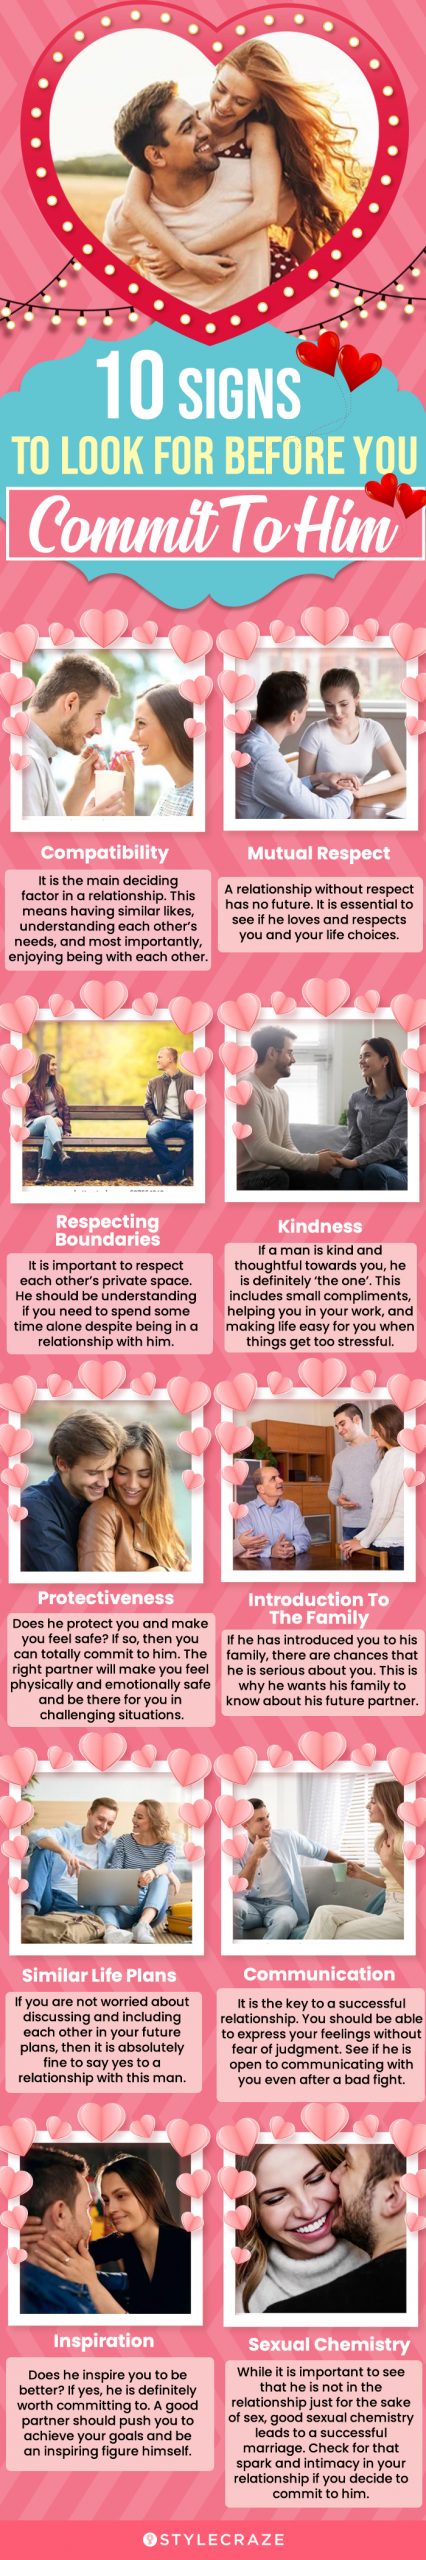 10 Signs To Look For Before You Commit To Him (infographic)